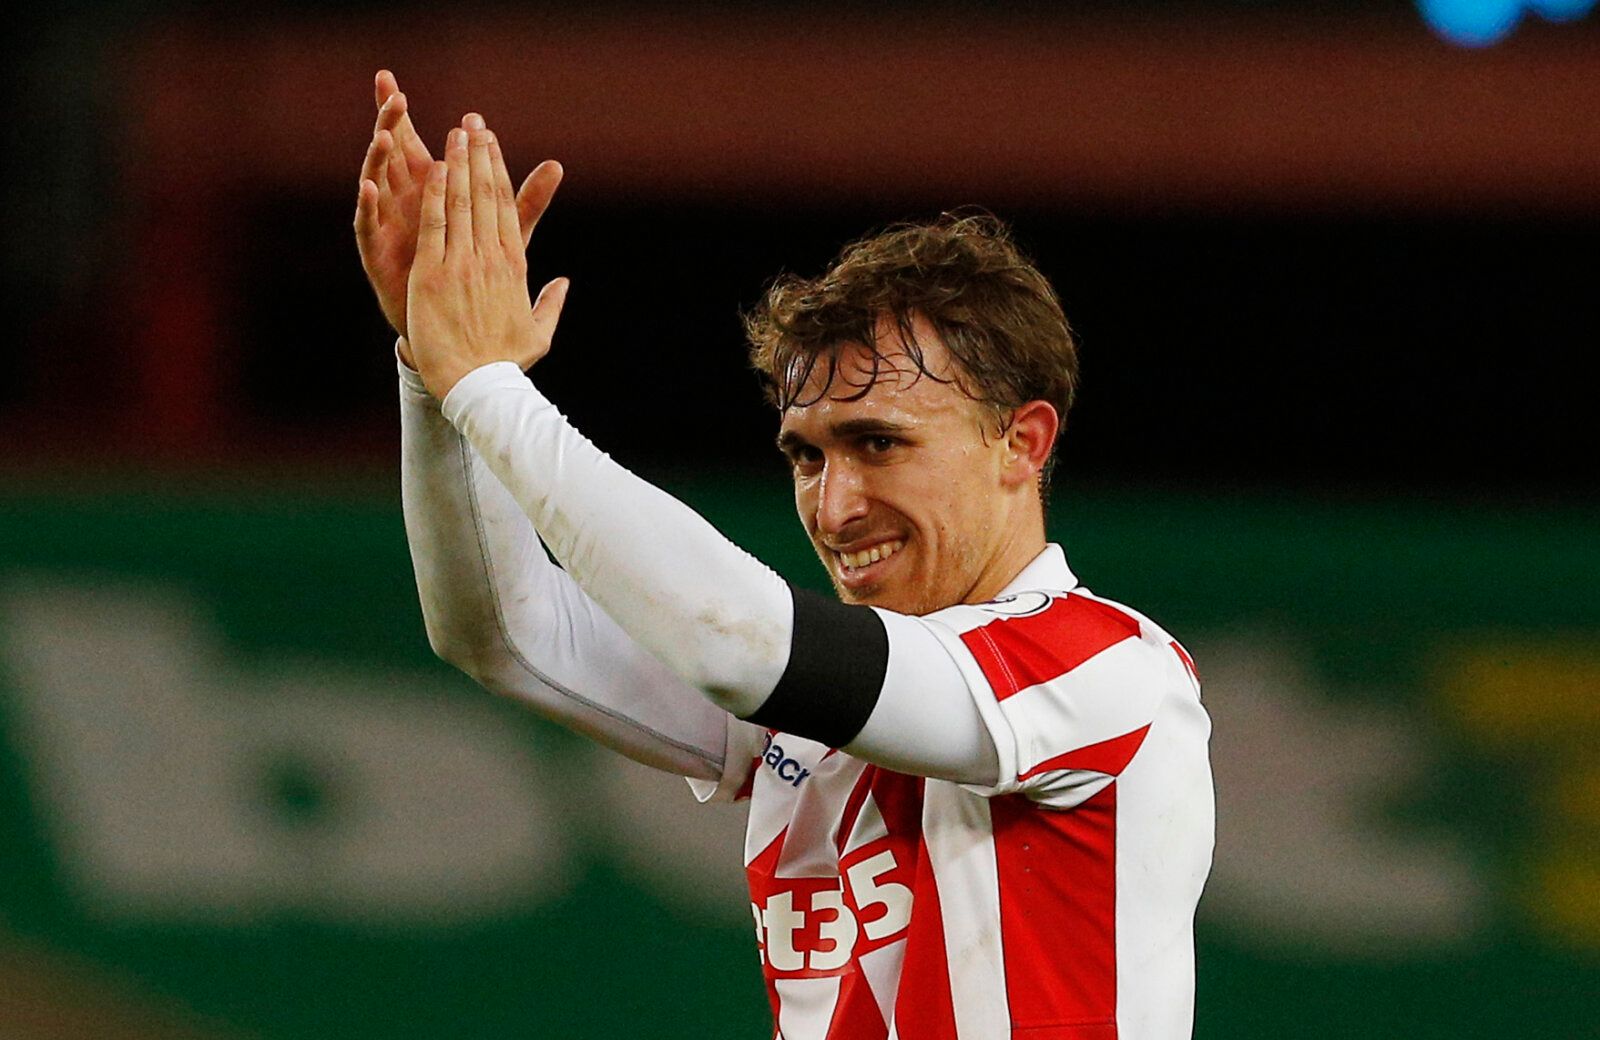 Britain Football Soccer - Stoke City v Burnley - Premier League - bet365 Stadium - 3/12/16 Stoke City's Marc Muniesa celebrates after the game  Action Images via Reuters / Craig Brough Livepic EDITORIAL USE ONLY. No use with unauthorized audio, video, data, fixture lists, club/league logos or 